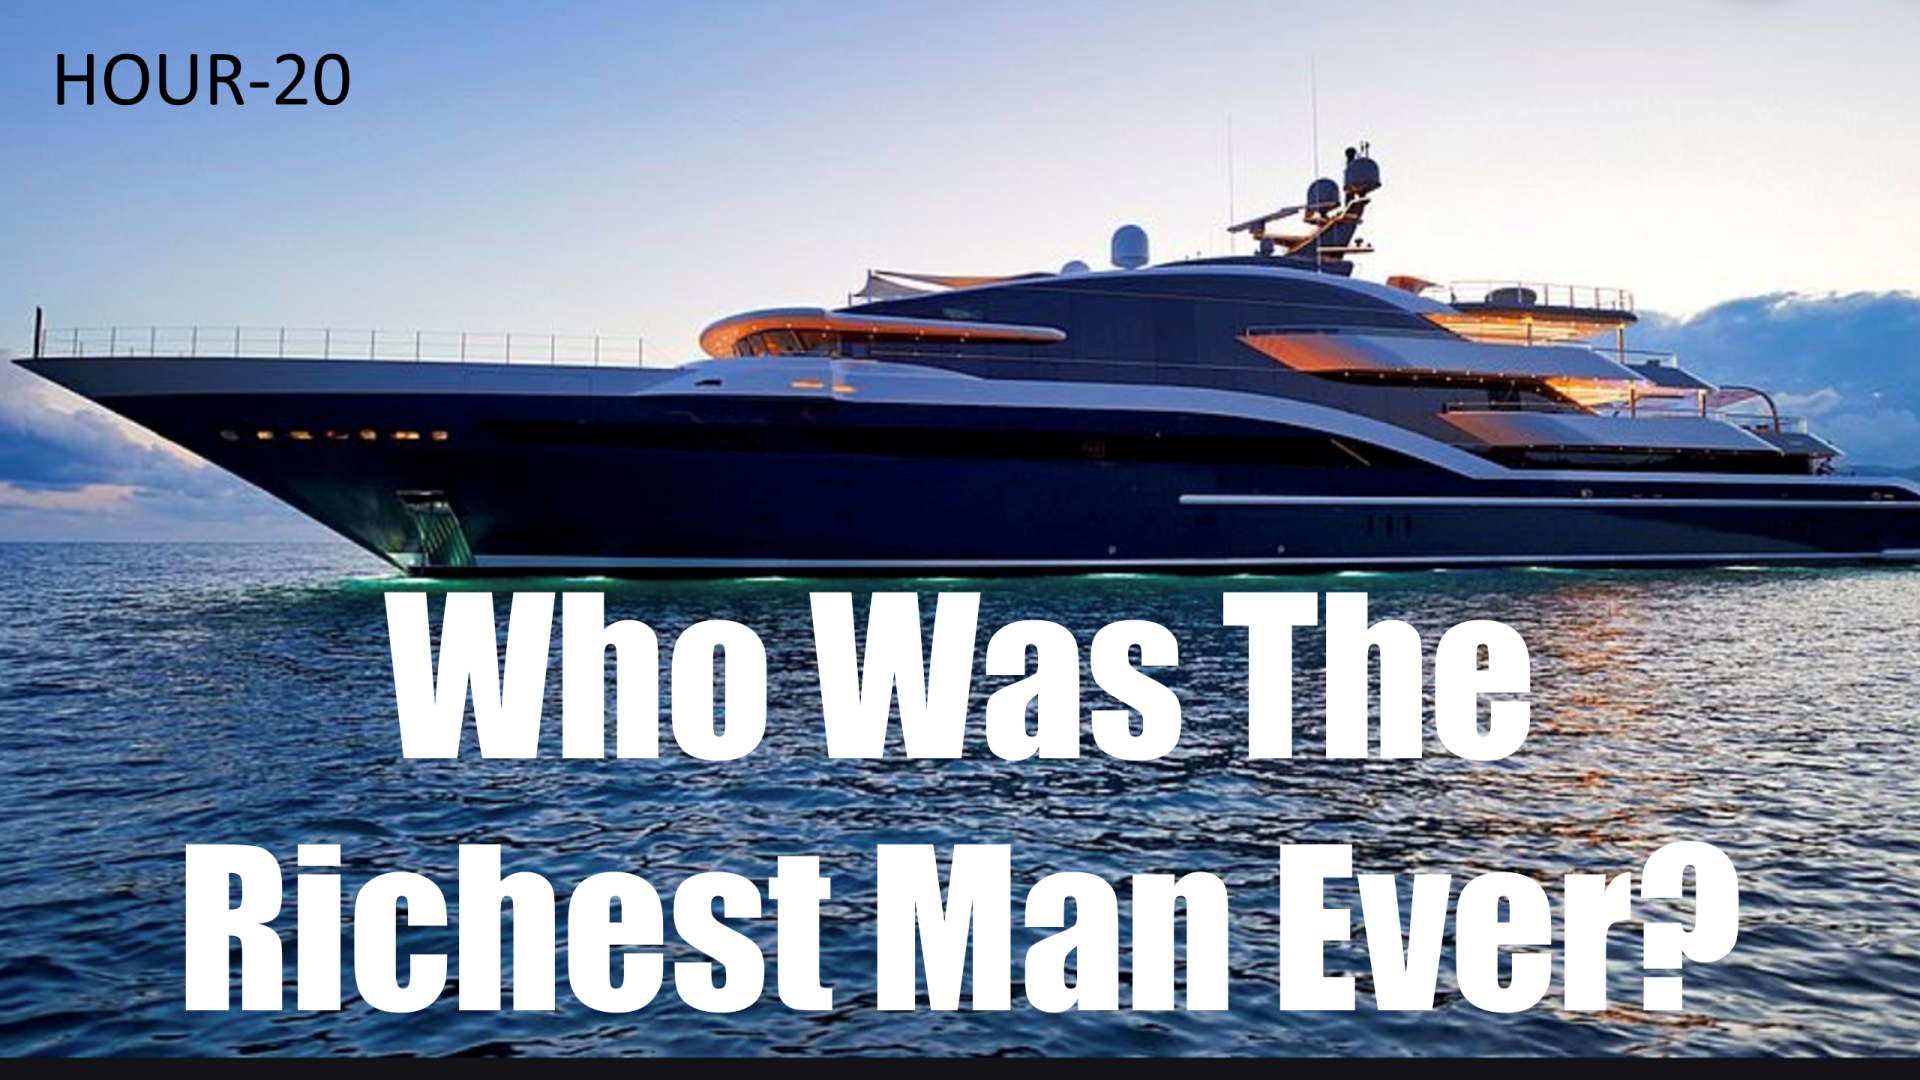 The Richest Man Ever